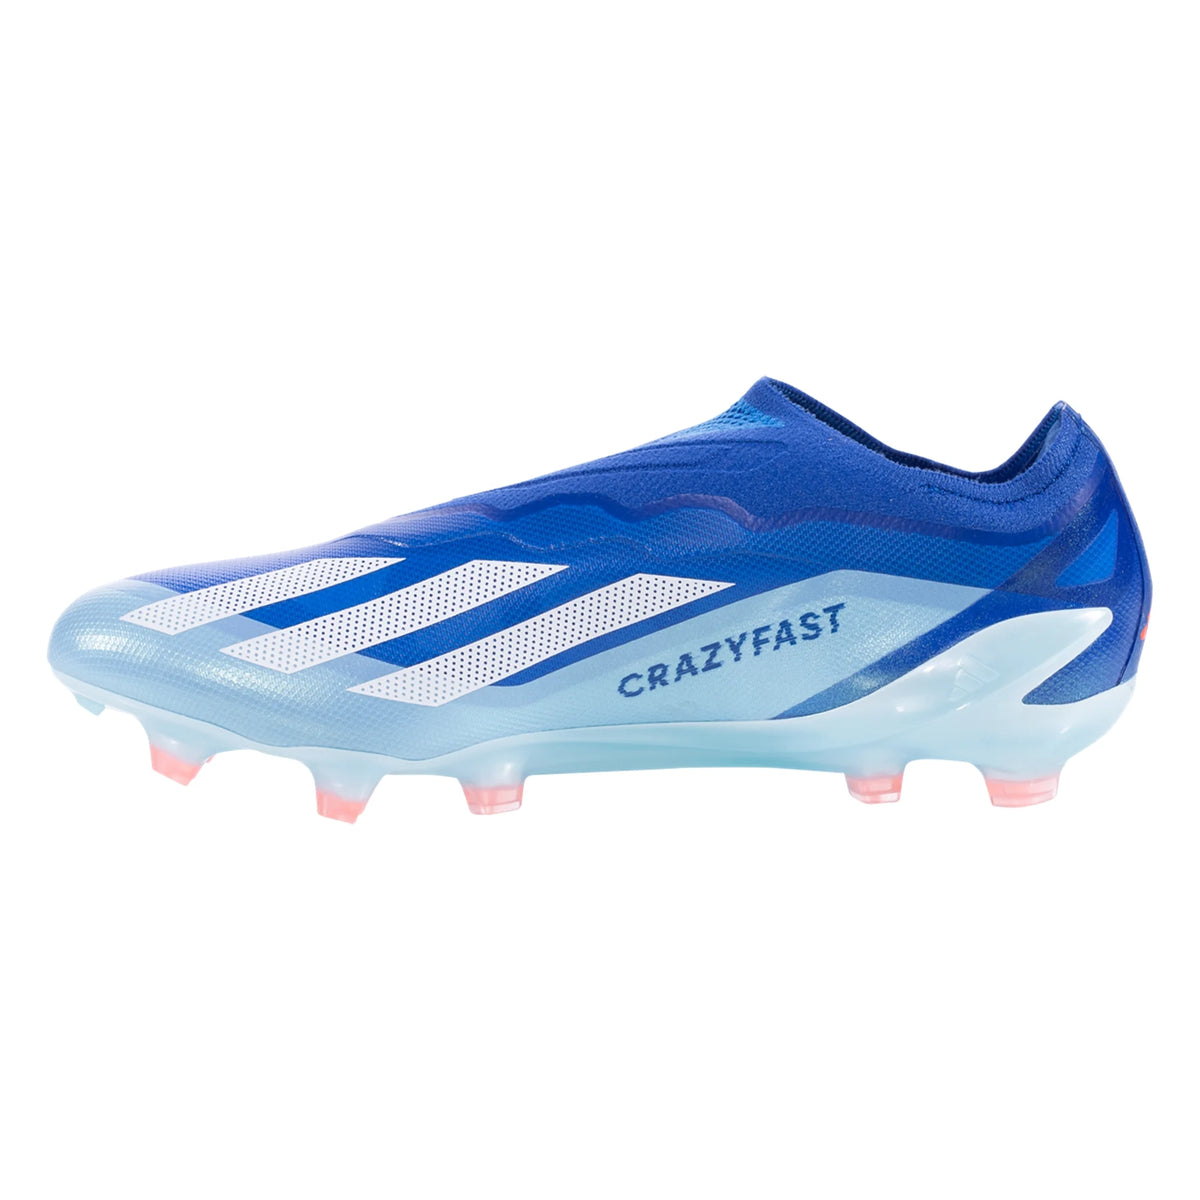 adidas X CrazyFast.1 Laceless FG Firm Ground Soccer Cleat - Bright ...